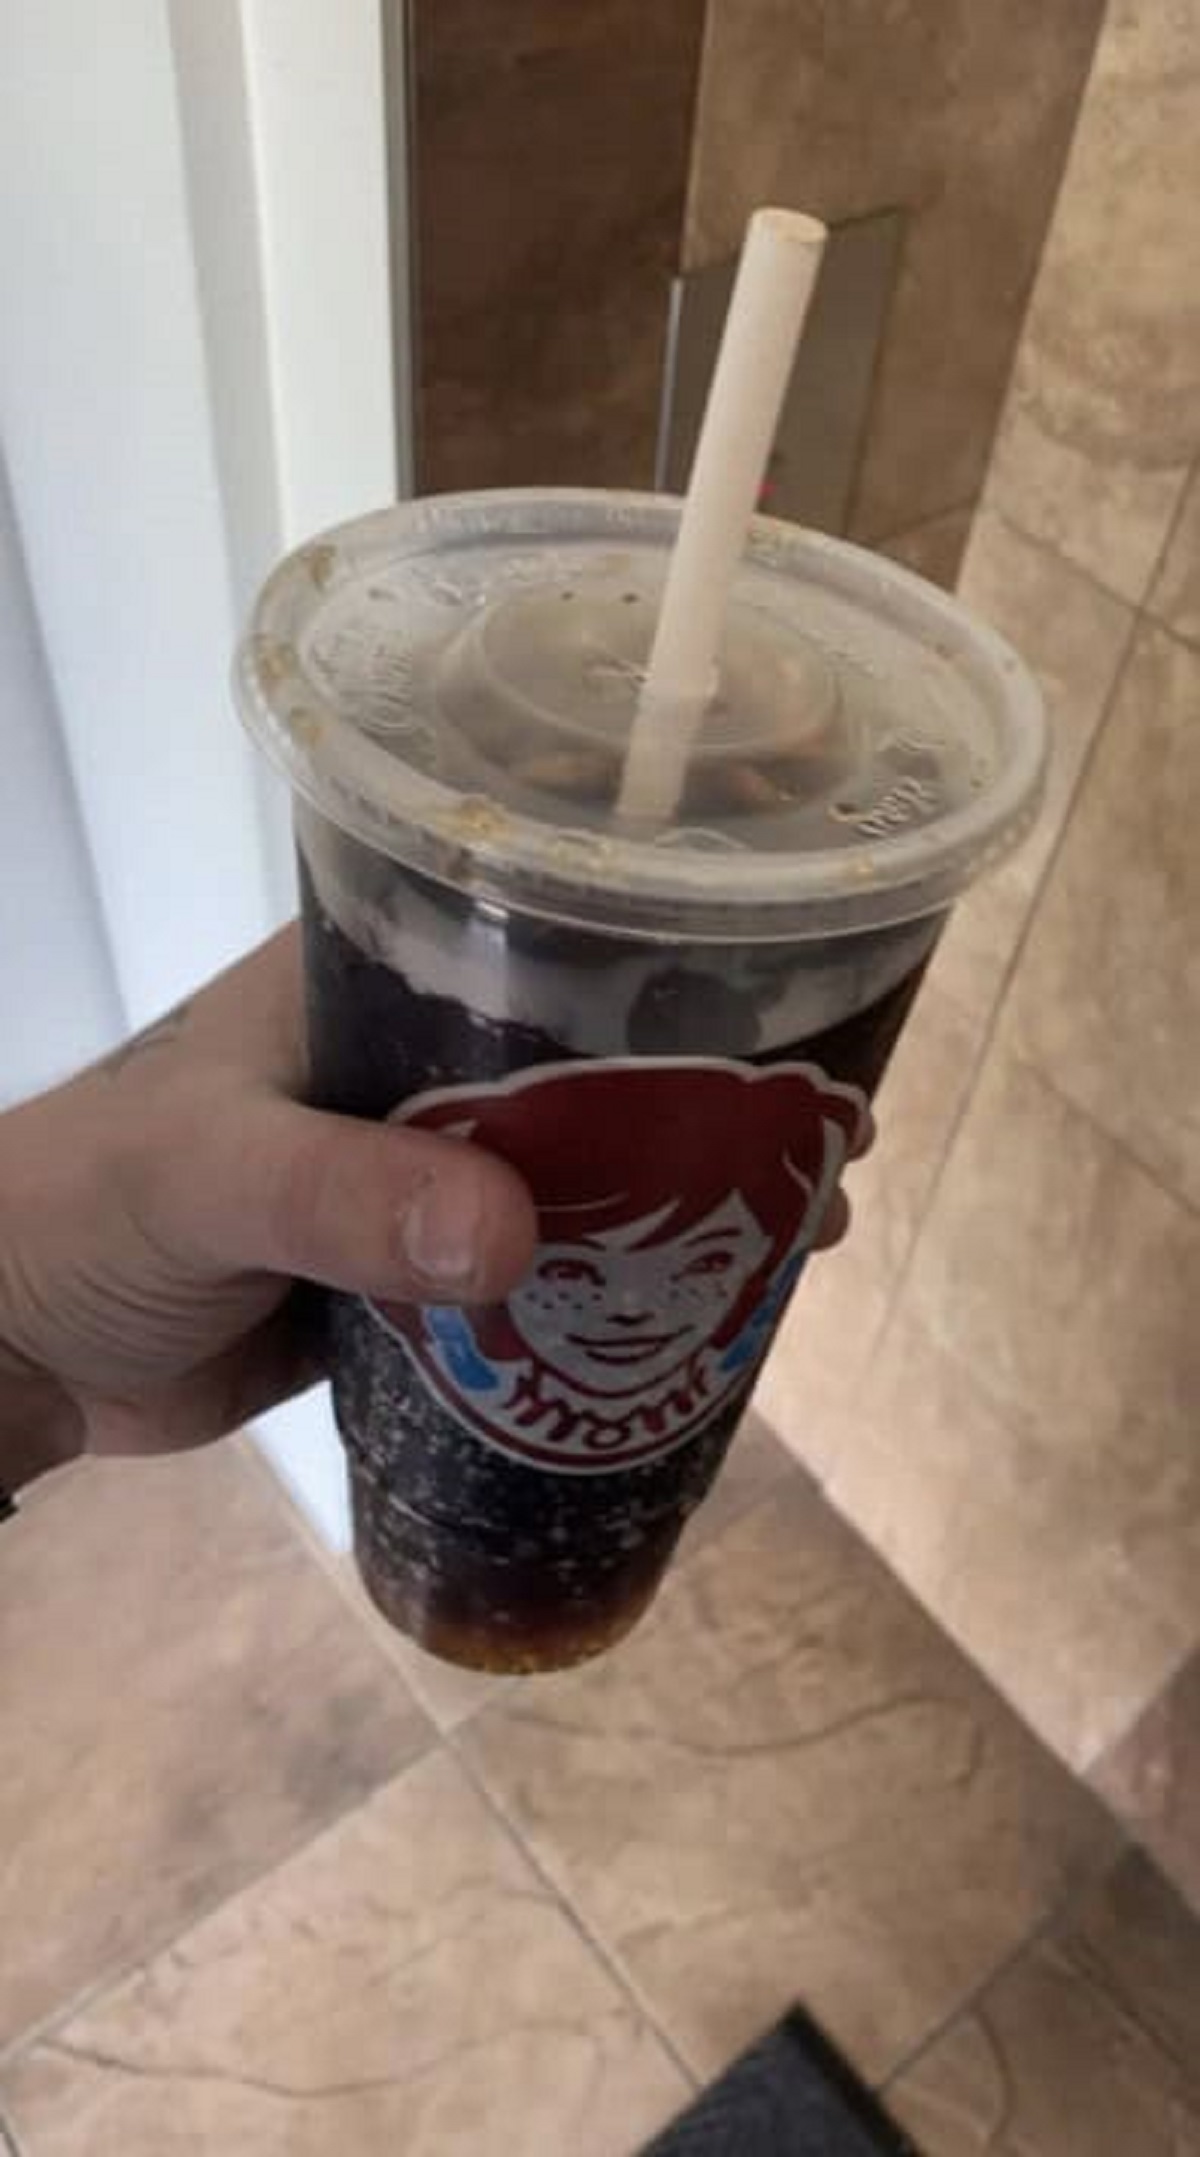 How did we go from paper cups and plastic straws to plastic cups and paper straws?